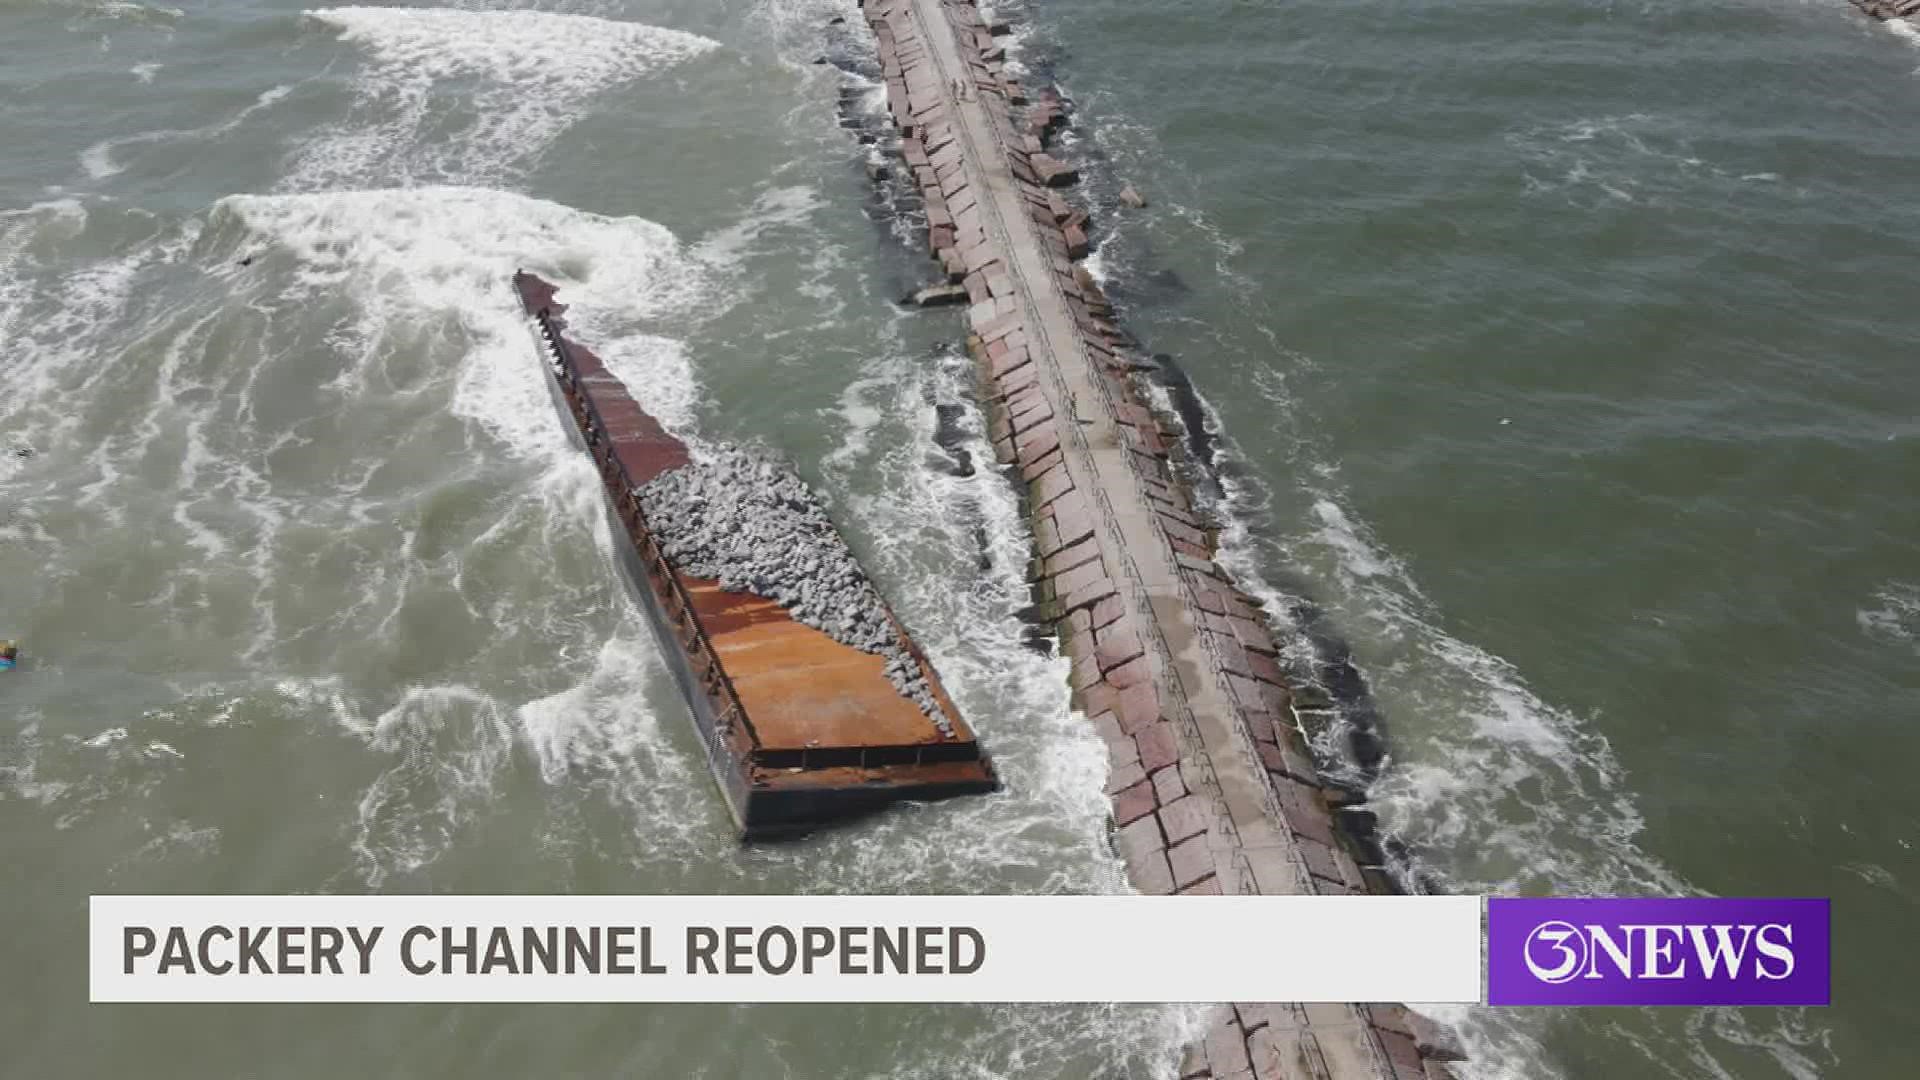 The U.S. Coast Guard is currently advising the owner on how to safely salvage the barge.